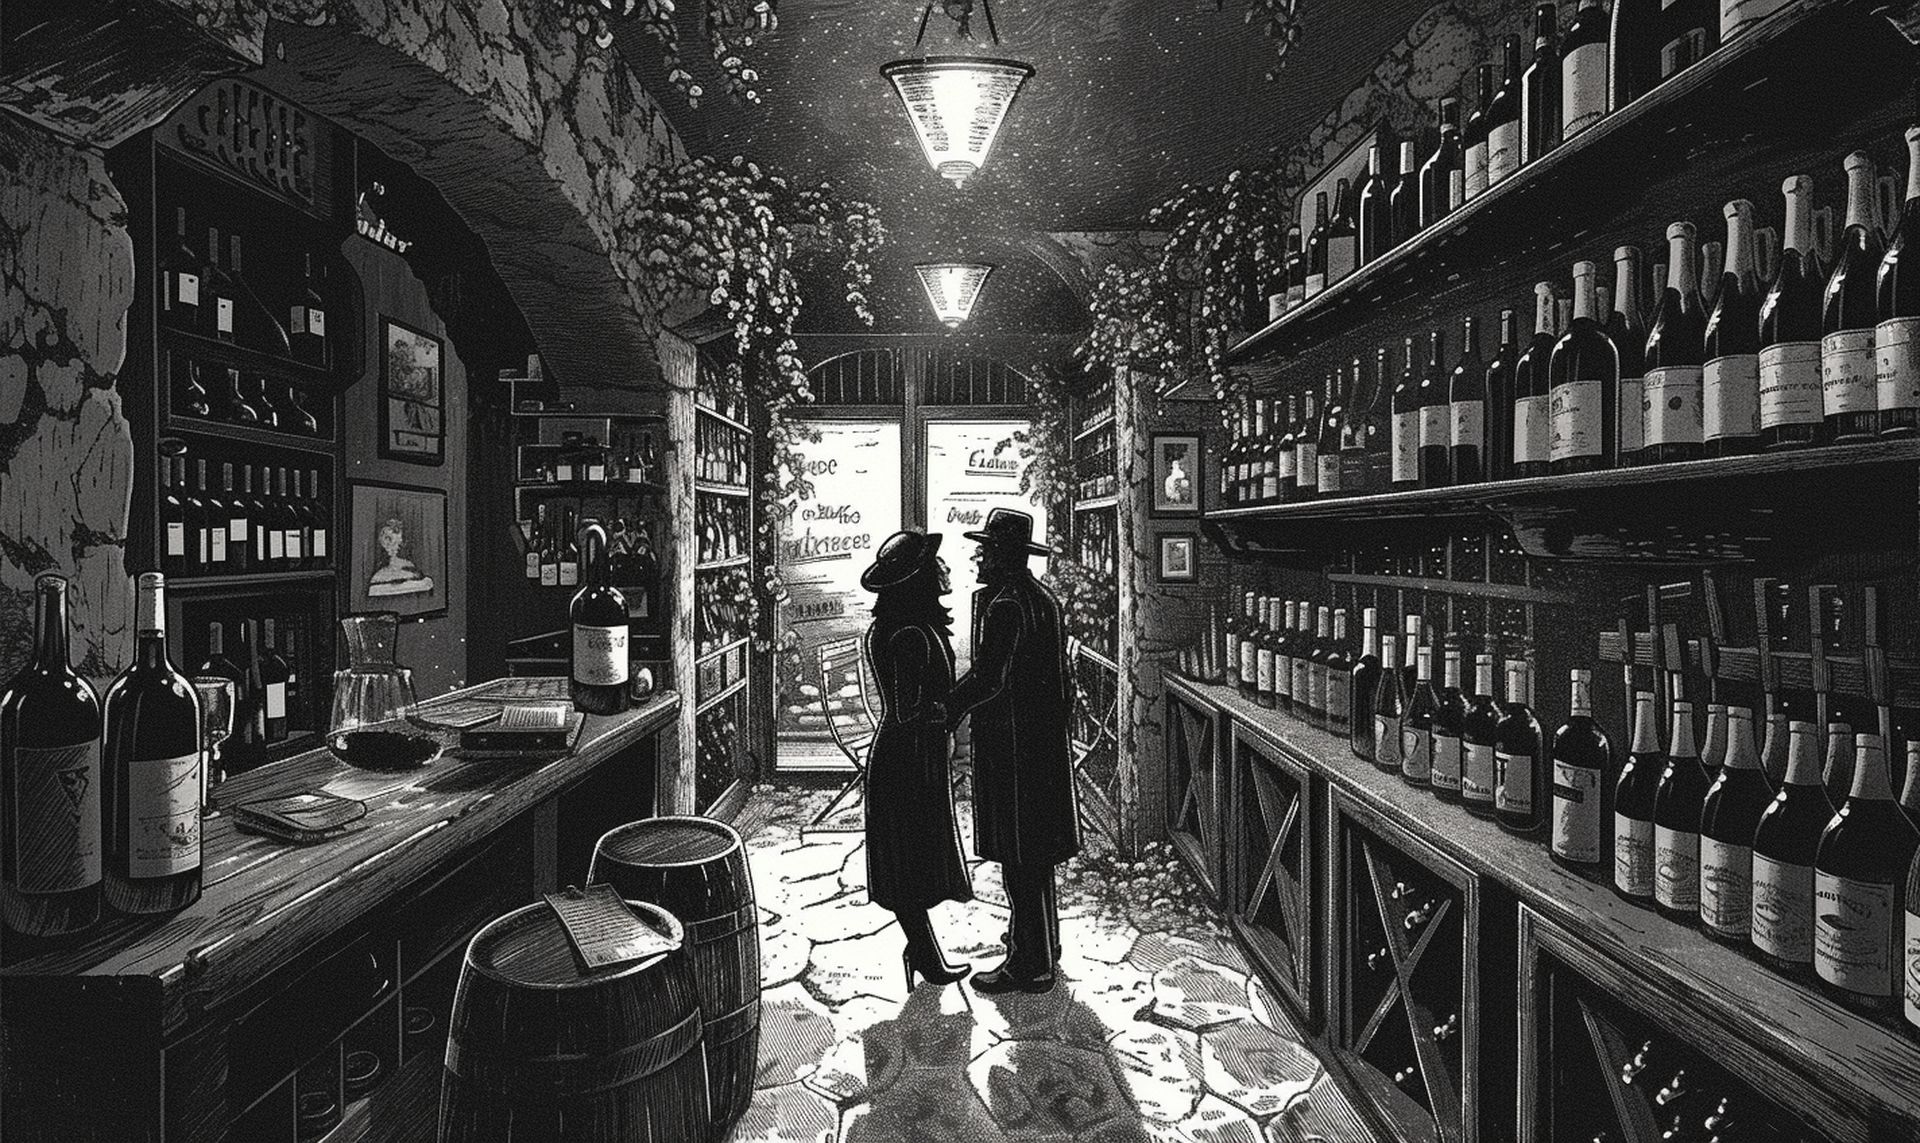 an image showing a couple selecting wine in a cozy, vintage wine shop, | image credit: Annahme der Existenz